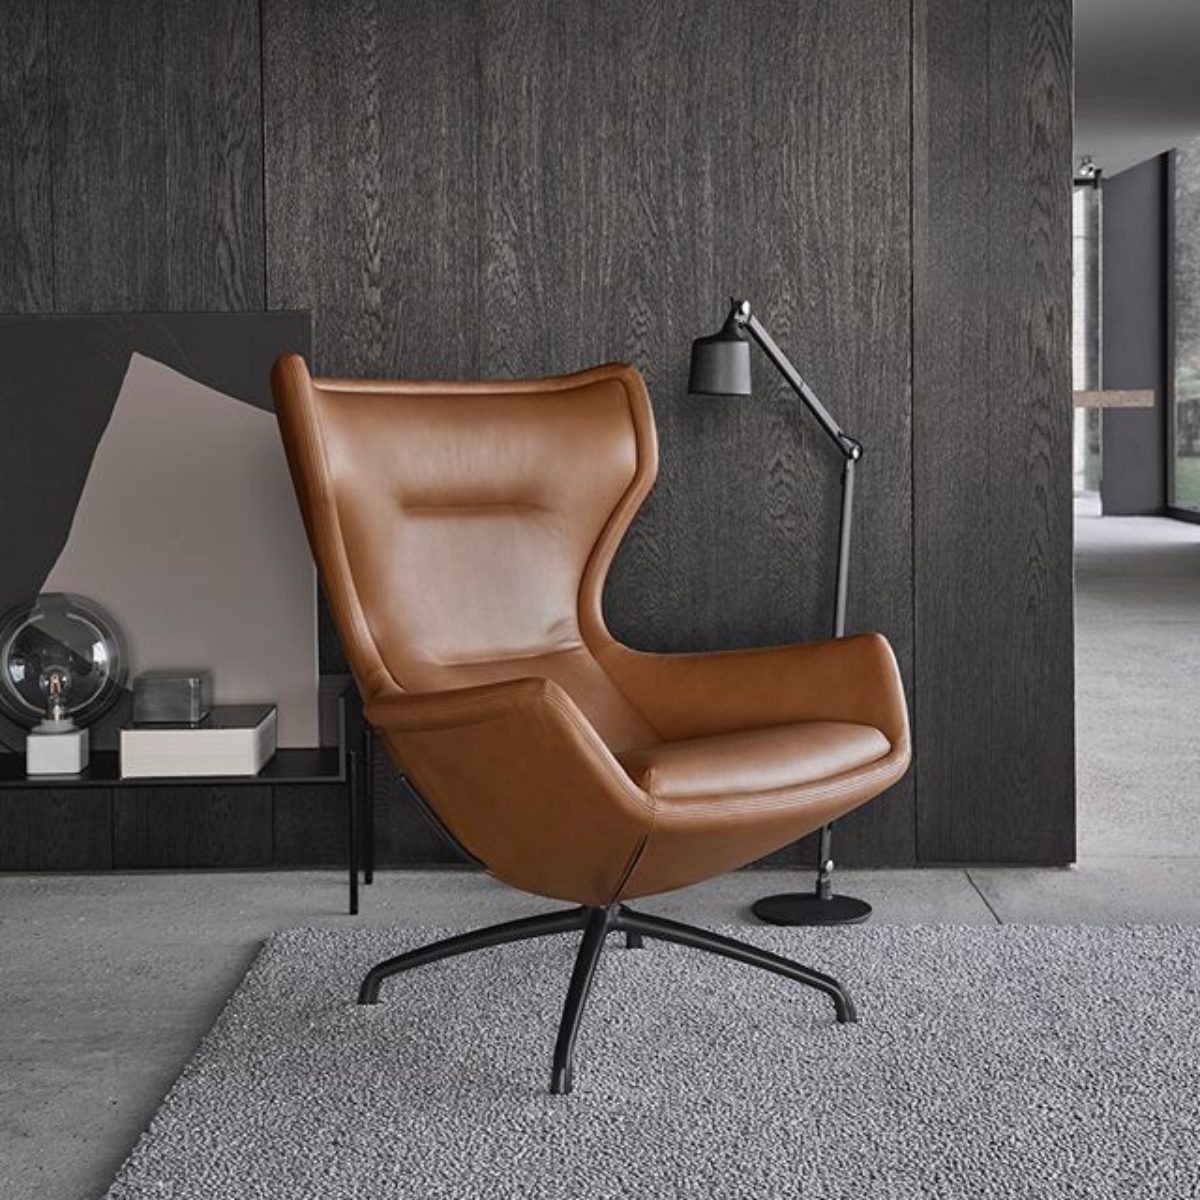 Eyye collectie fauteuil chair relax puuro 01